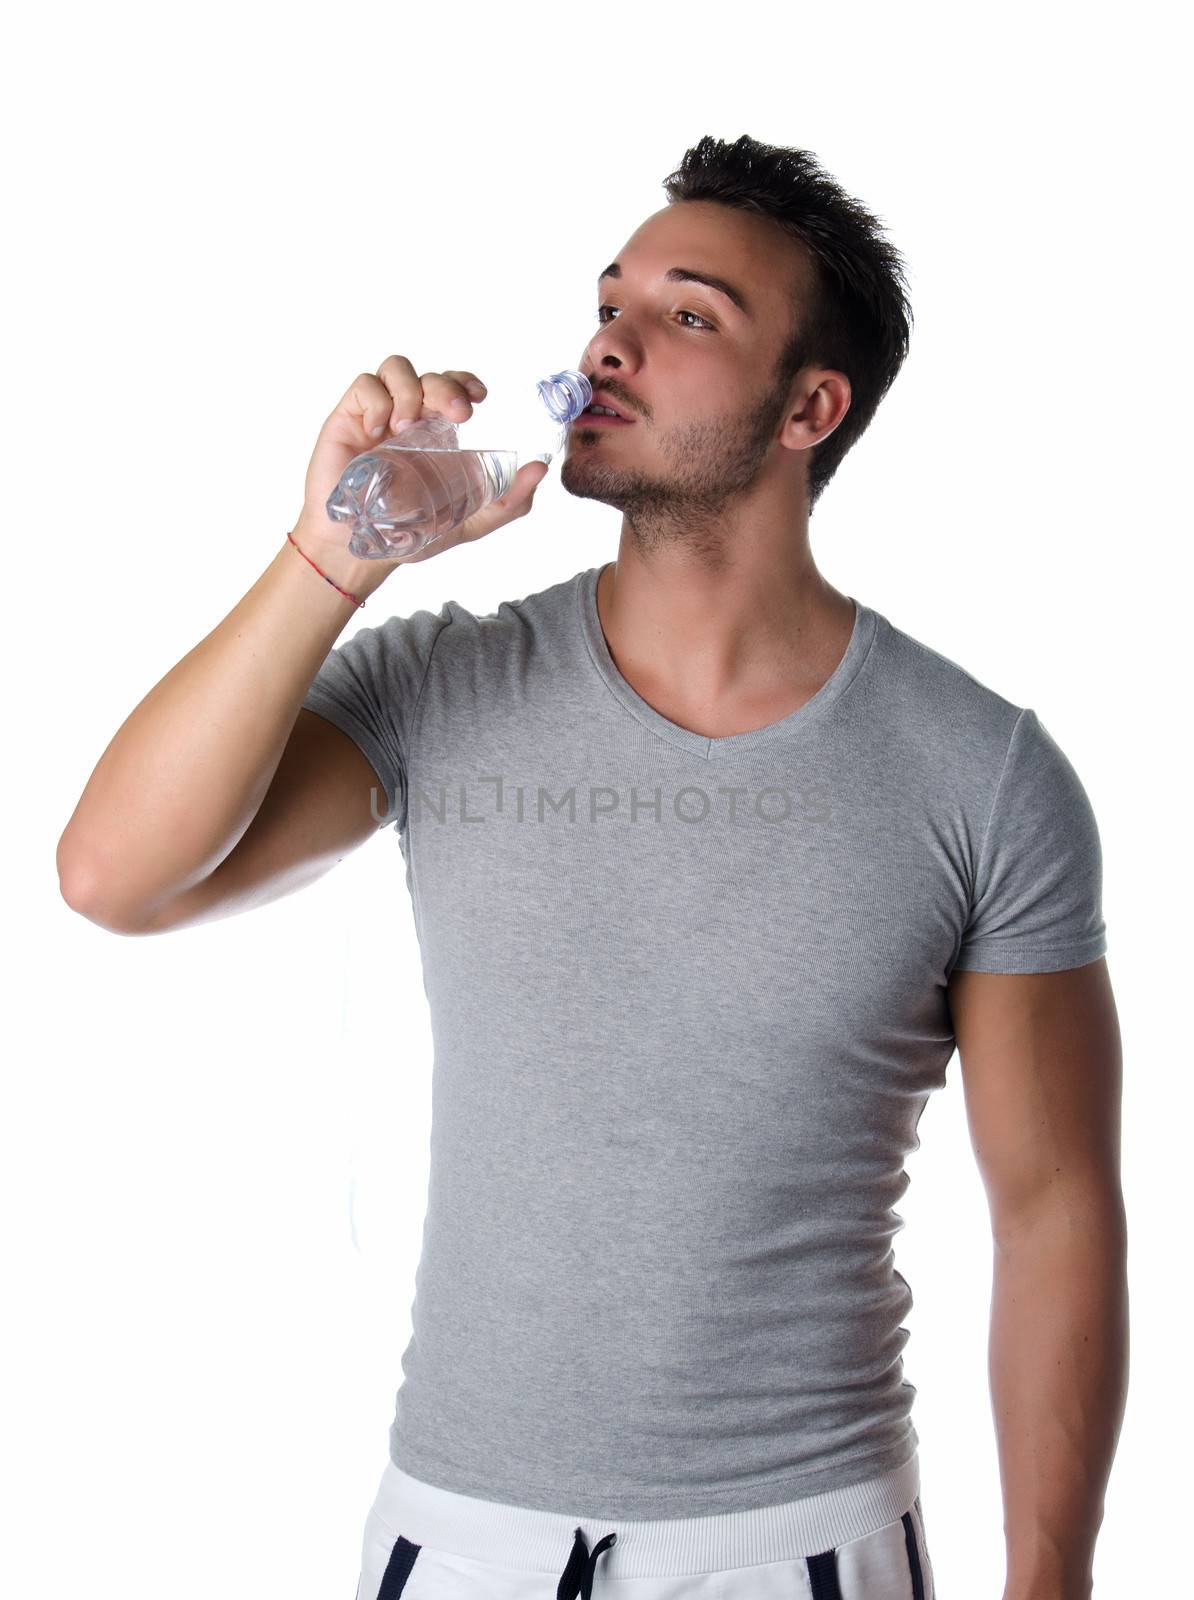 Handsome and athletic young man drinking water by artofphoto